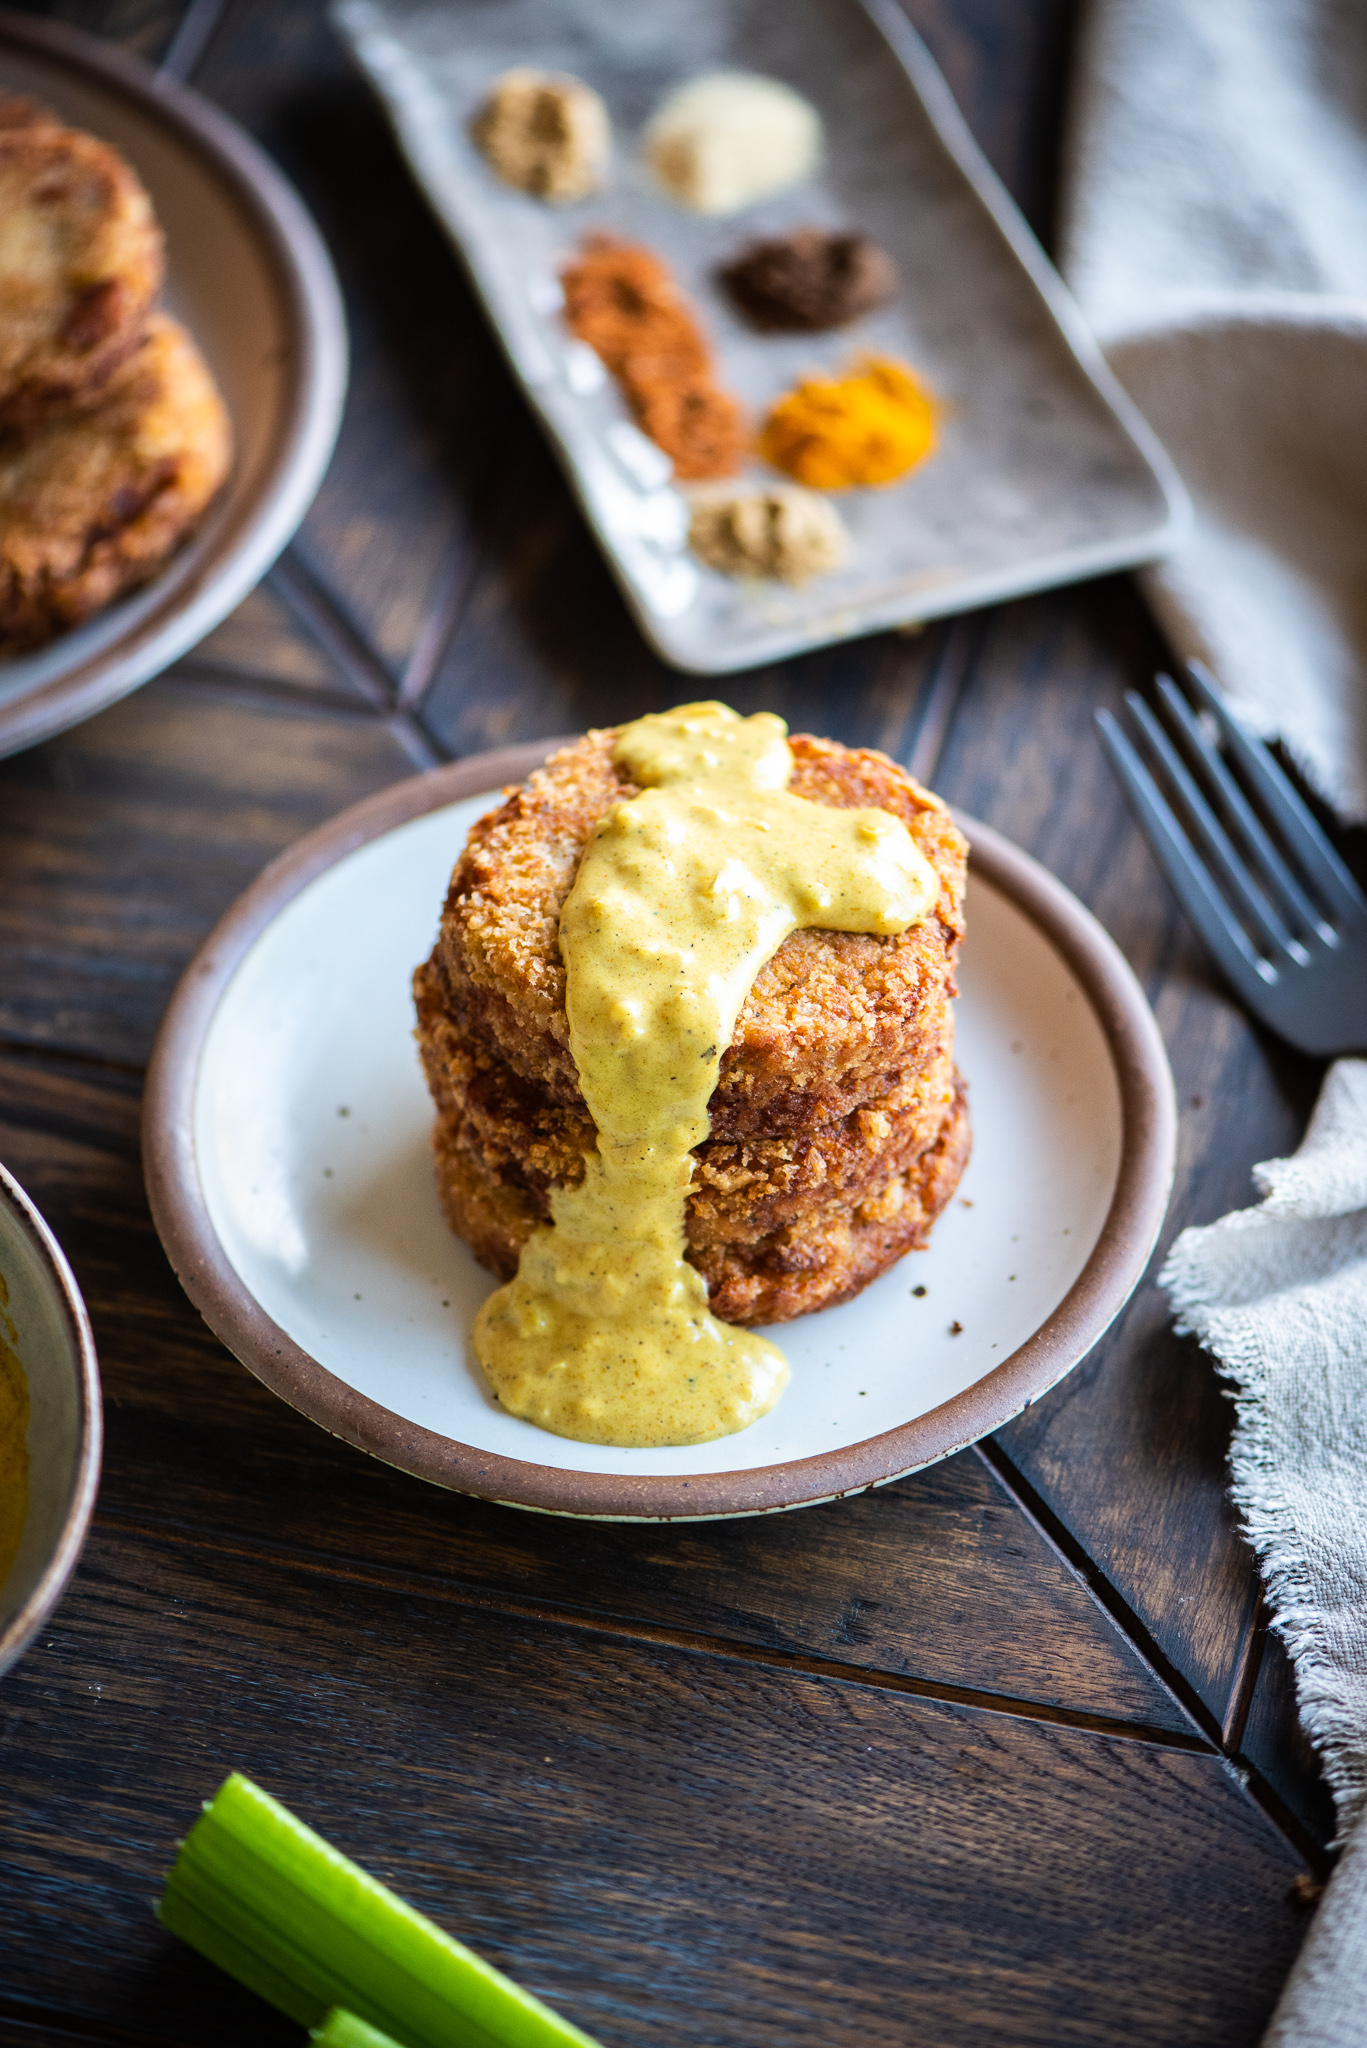 Creole-Style African Fish Patties with Pontchartrain Sauce